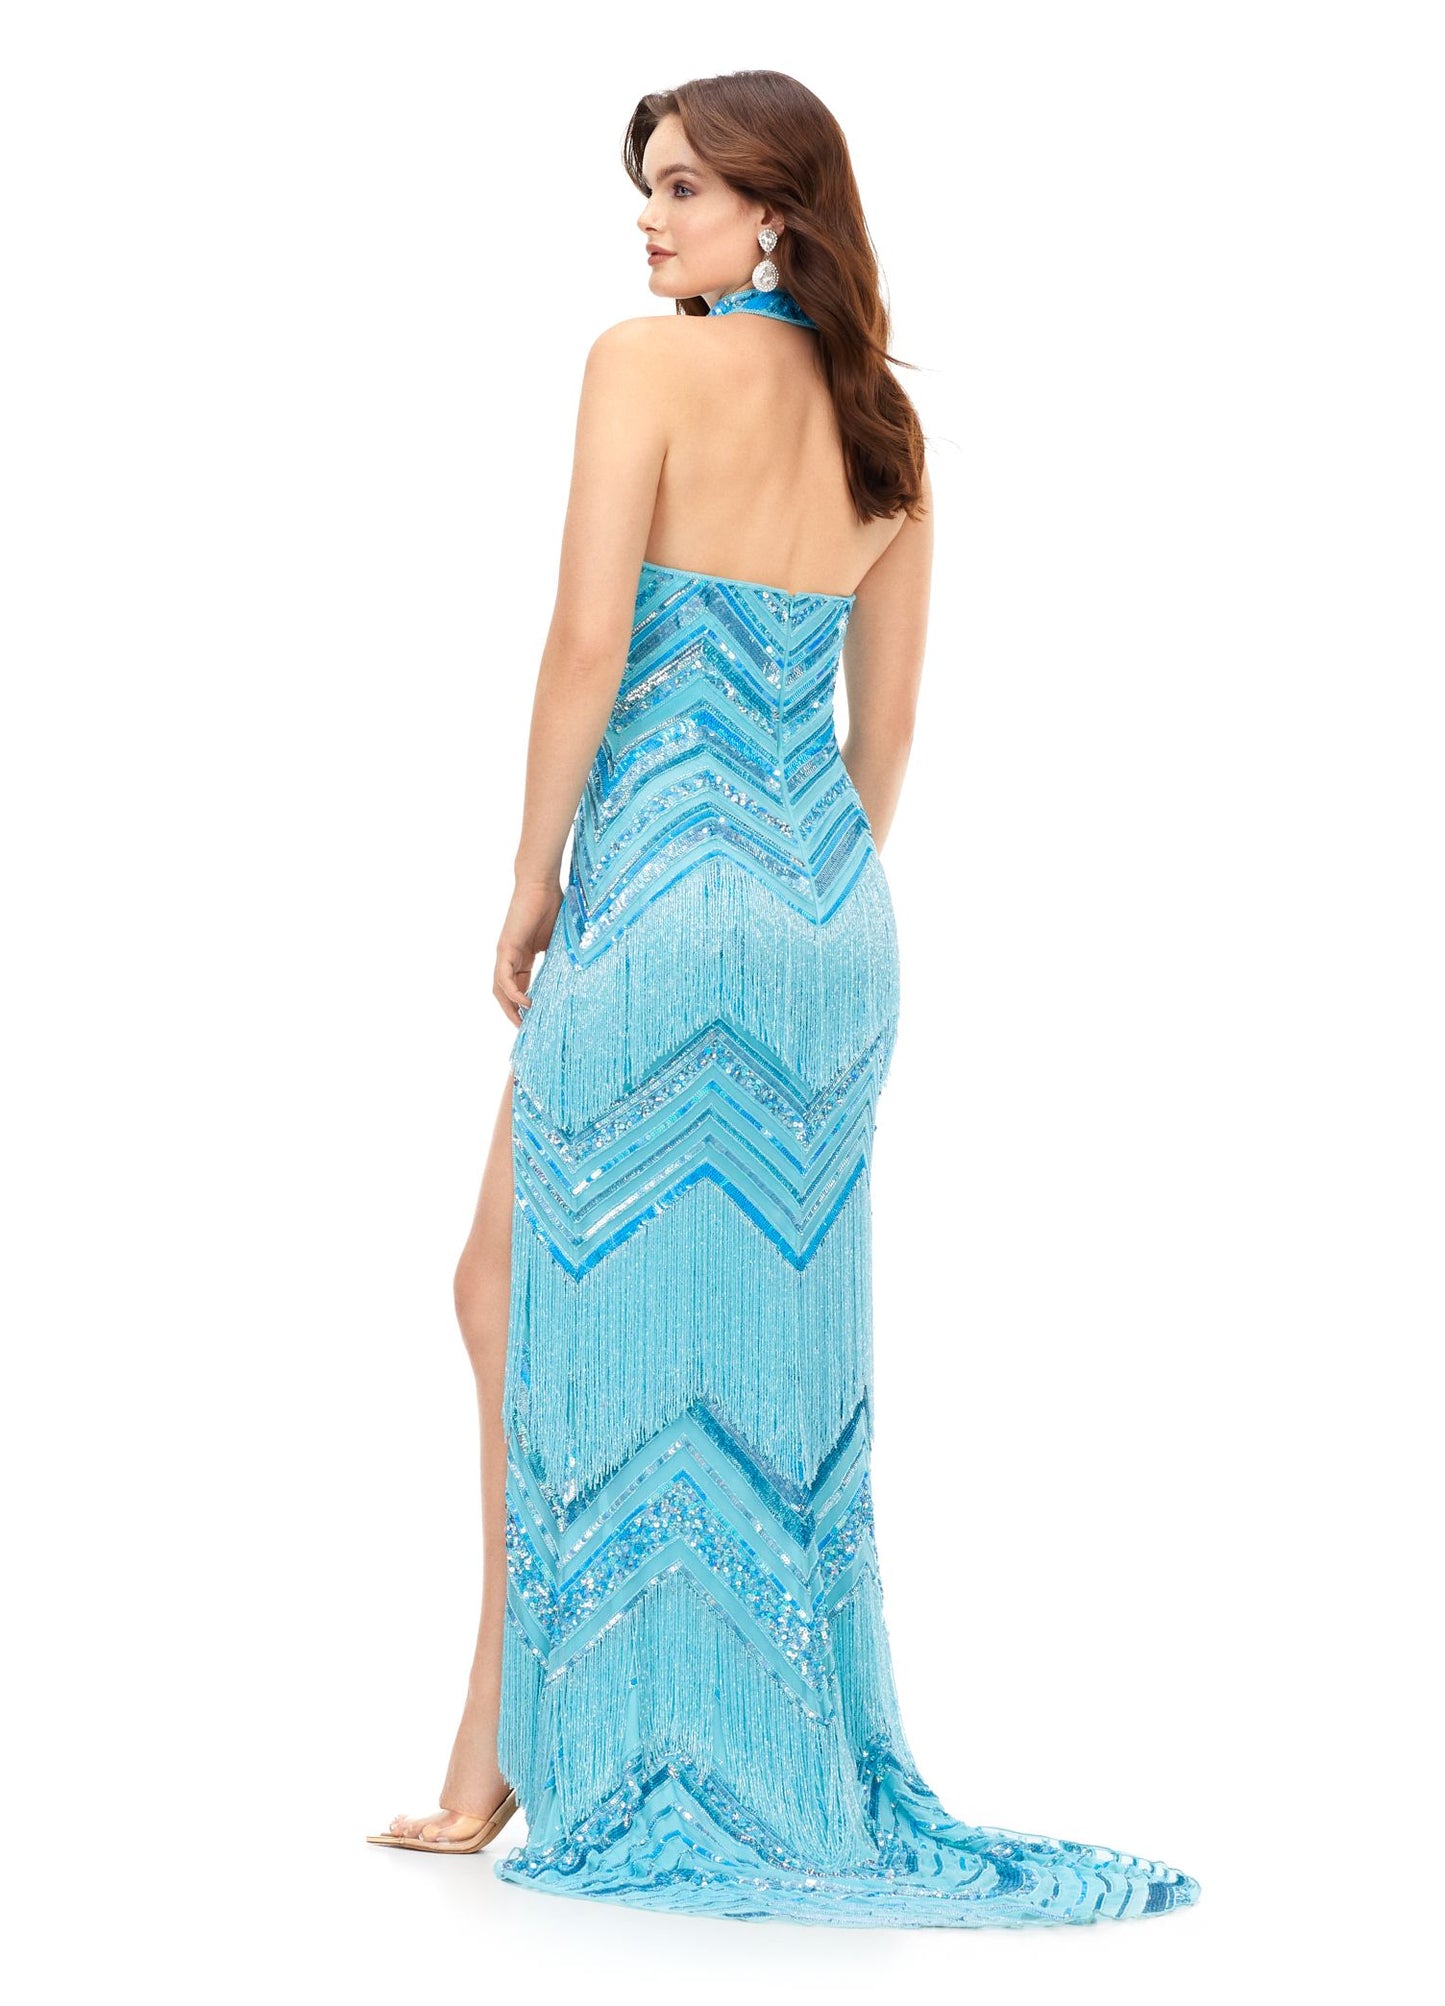 Ashley Lauren 11259 Strapless Prom Dress Beaded Evening Gown with Fringe Details